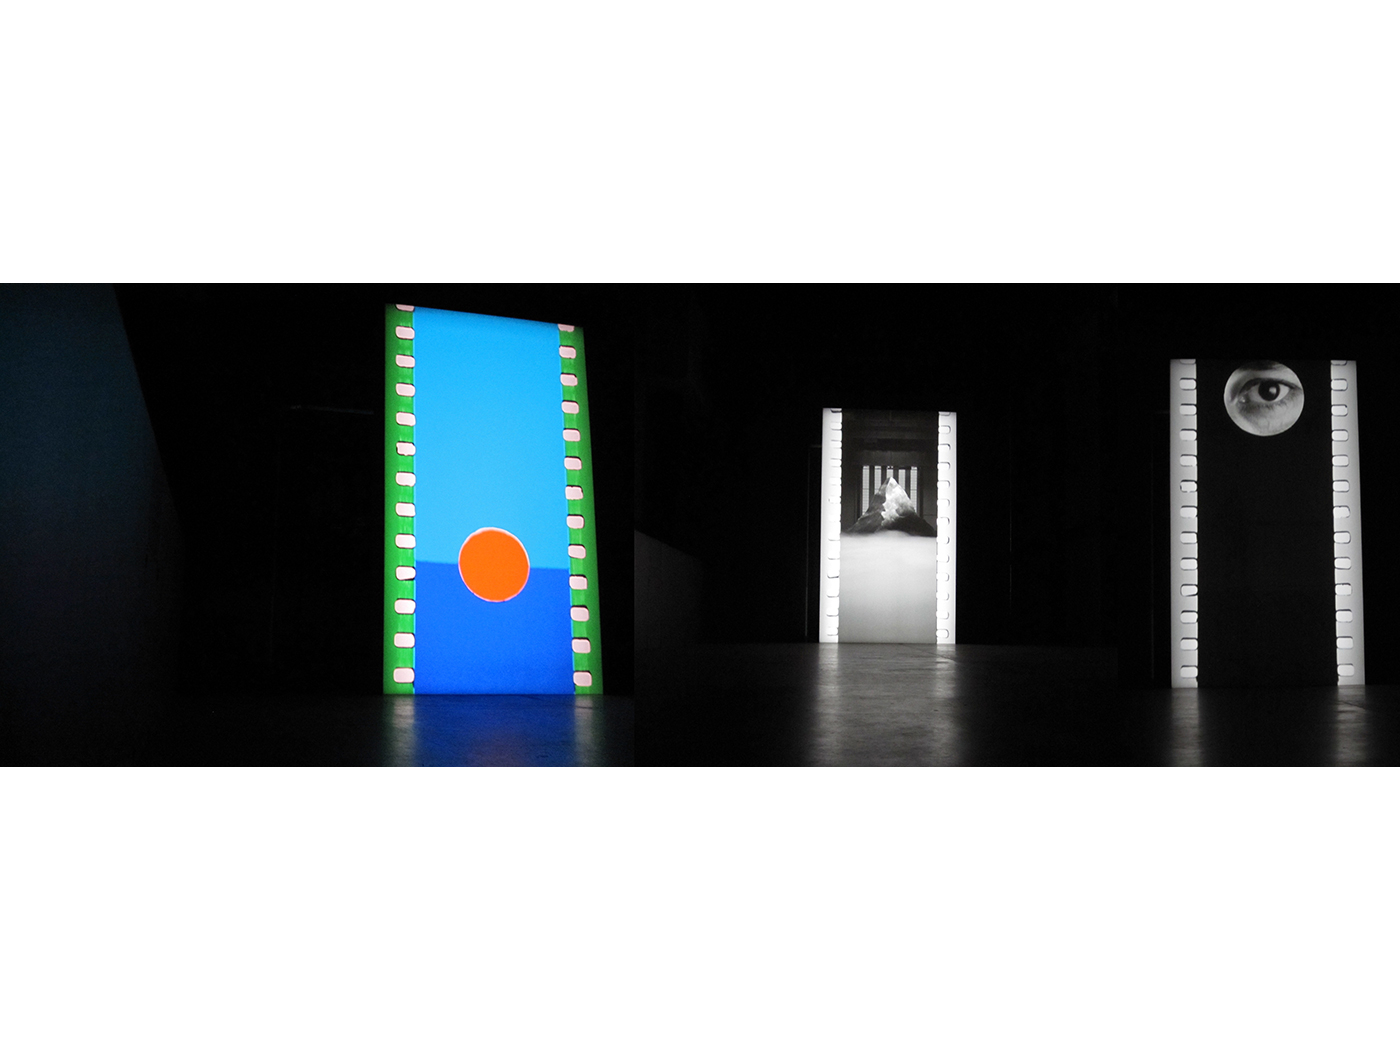 Still from 'FILM' (2011). 'FILM' was specifically commissioned in 2011 as part of the Unilever Series for the Tate Modern’s Turbine Hall. Images are juxtaposed in the film with panels of colour. Dean continues to return to imagery of lightning, trees and seascapes often referencing these in her work.)